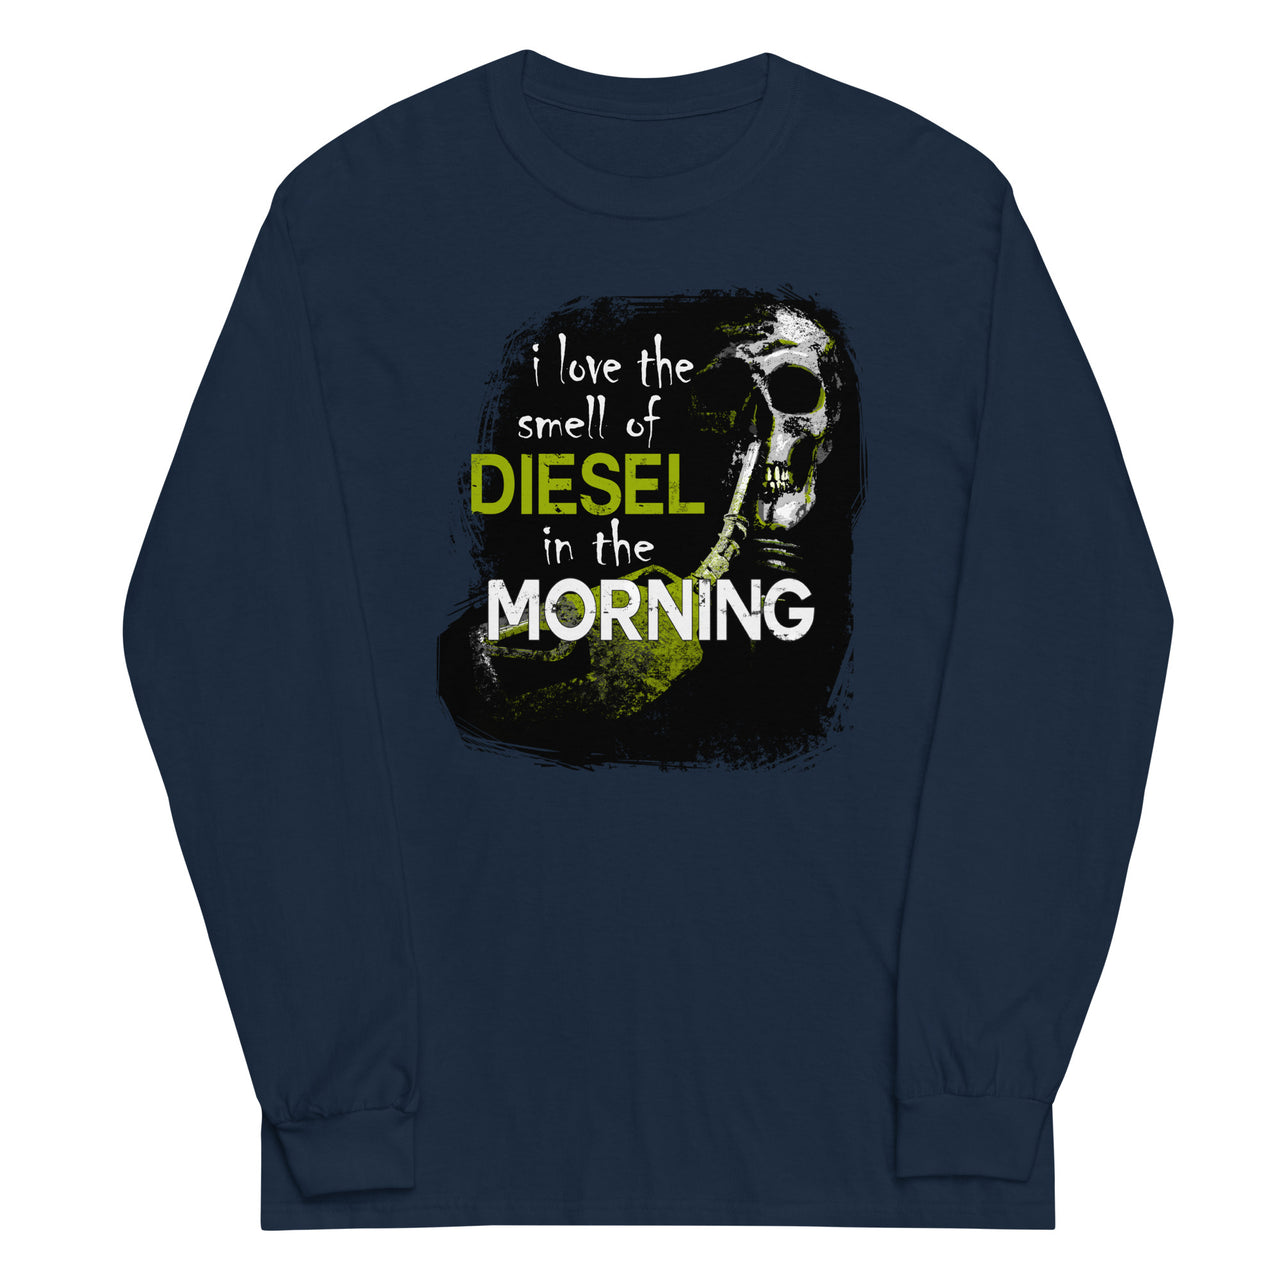 Truck Long Sleeve T-Shirt - I Love The Smell of Diesel In The Morning in navy